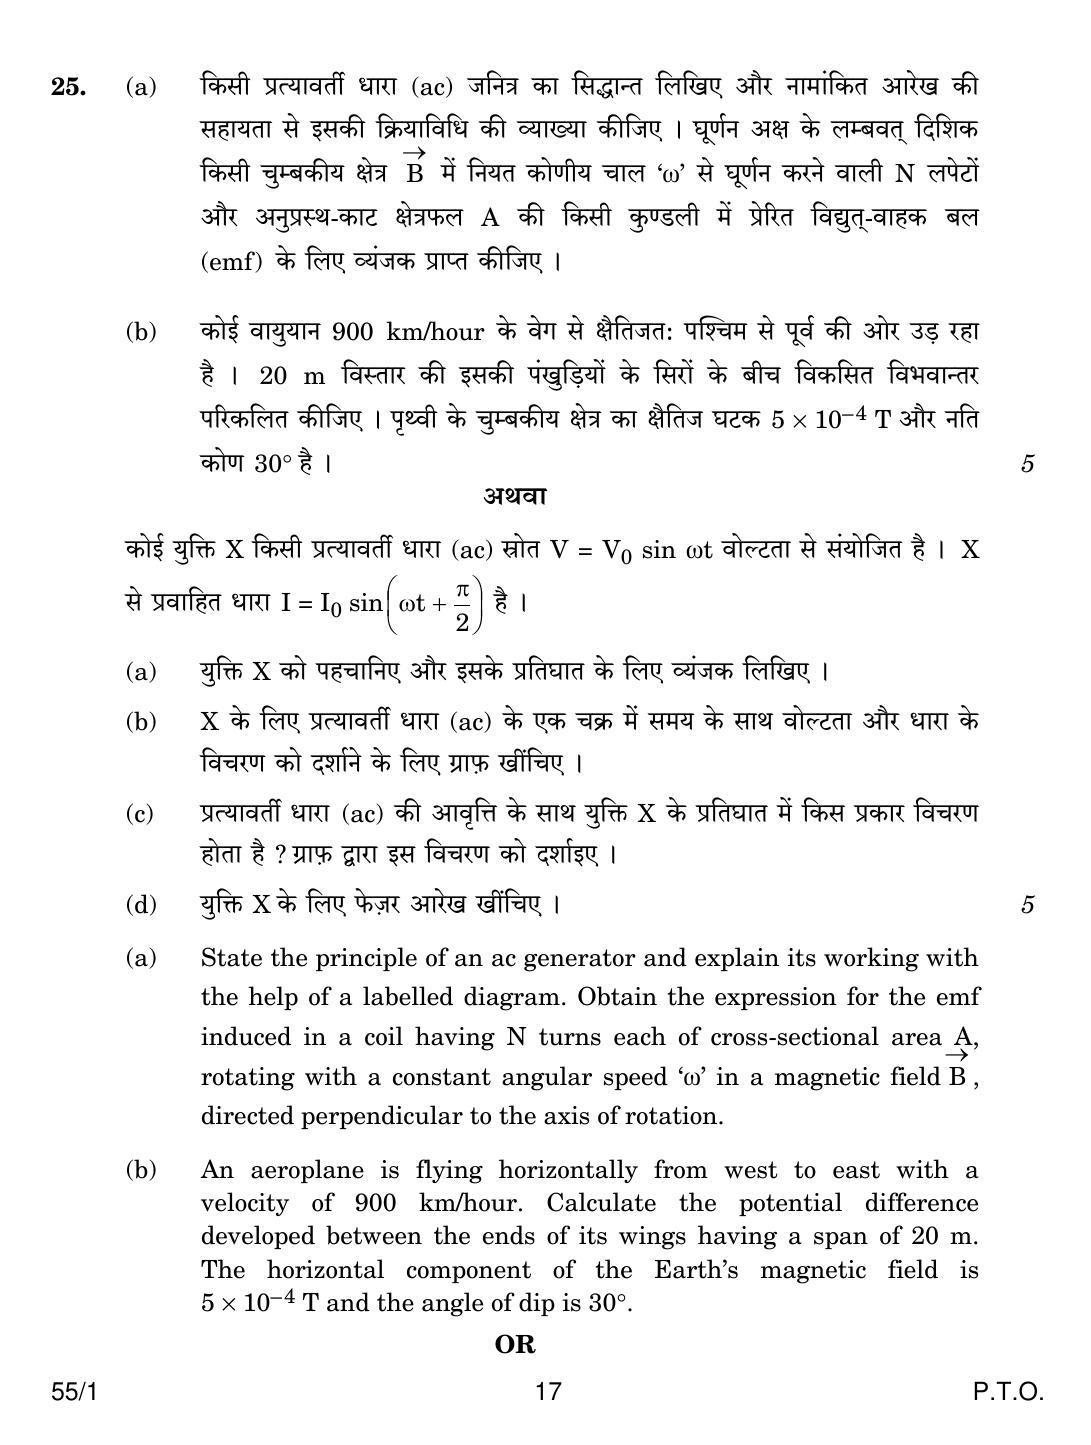 CBSE Class 12 55-1 PHYSICS 2018 Question Paper - Page 17